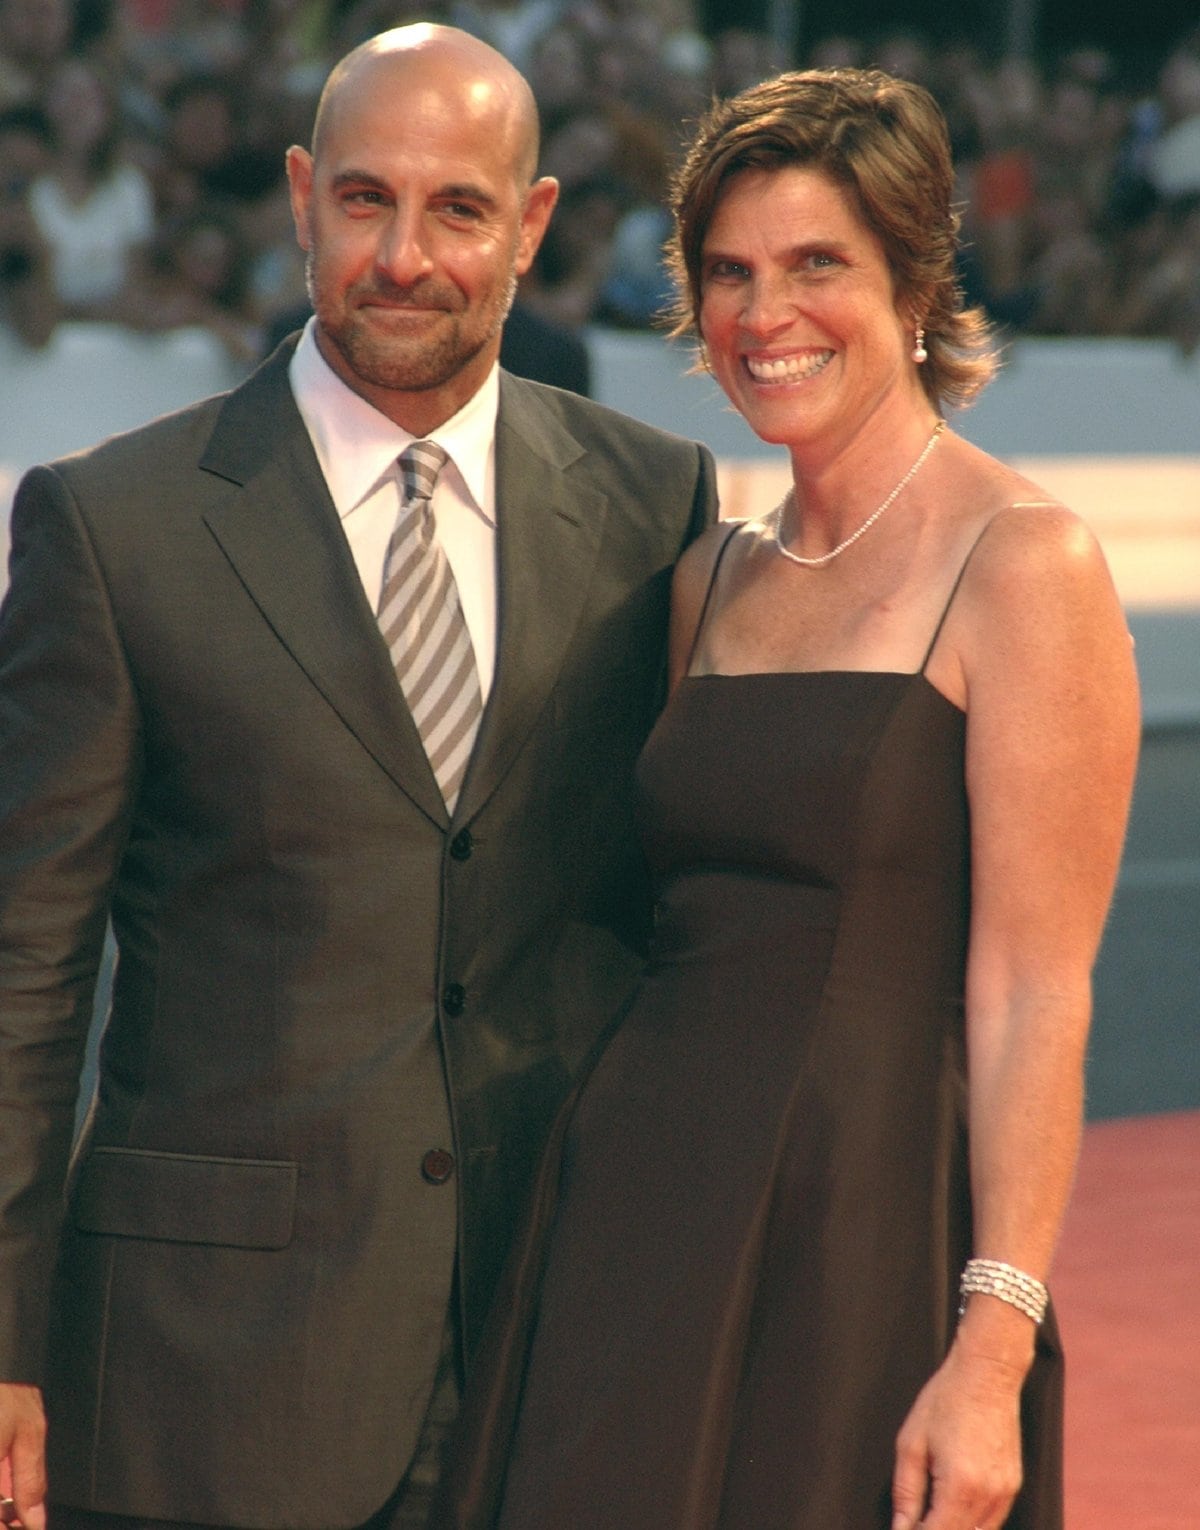 Stanley Tucci and Kate Spath-Tucci attend the premiere of "The Devil Wears Prada" during the 63rd annual International Venice Film Festival